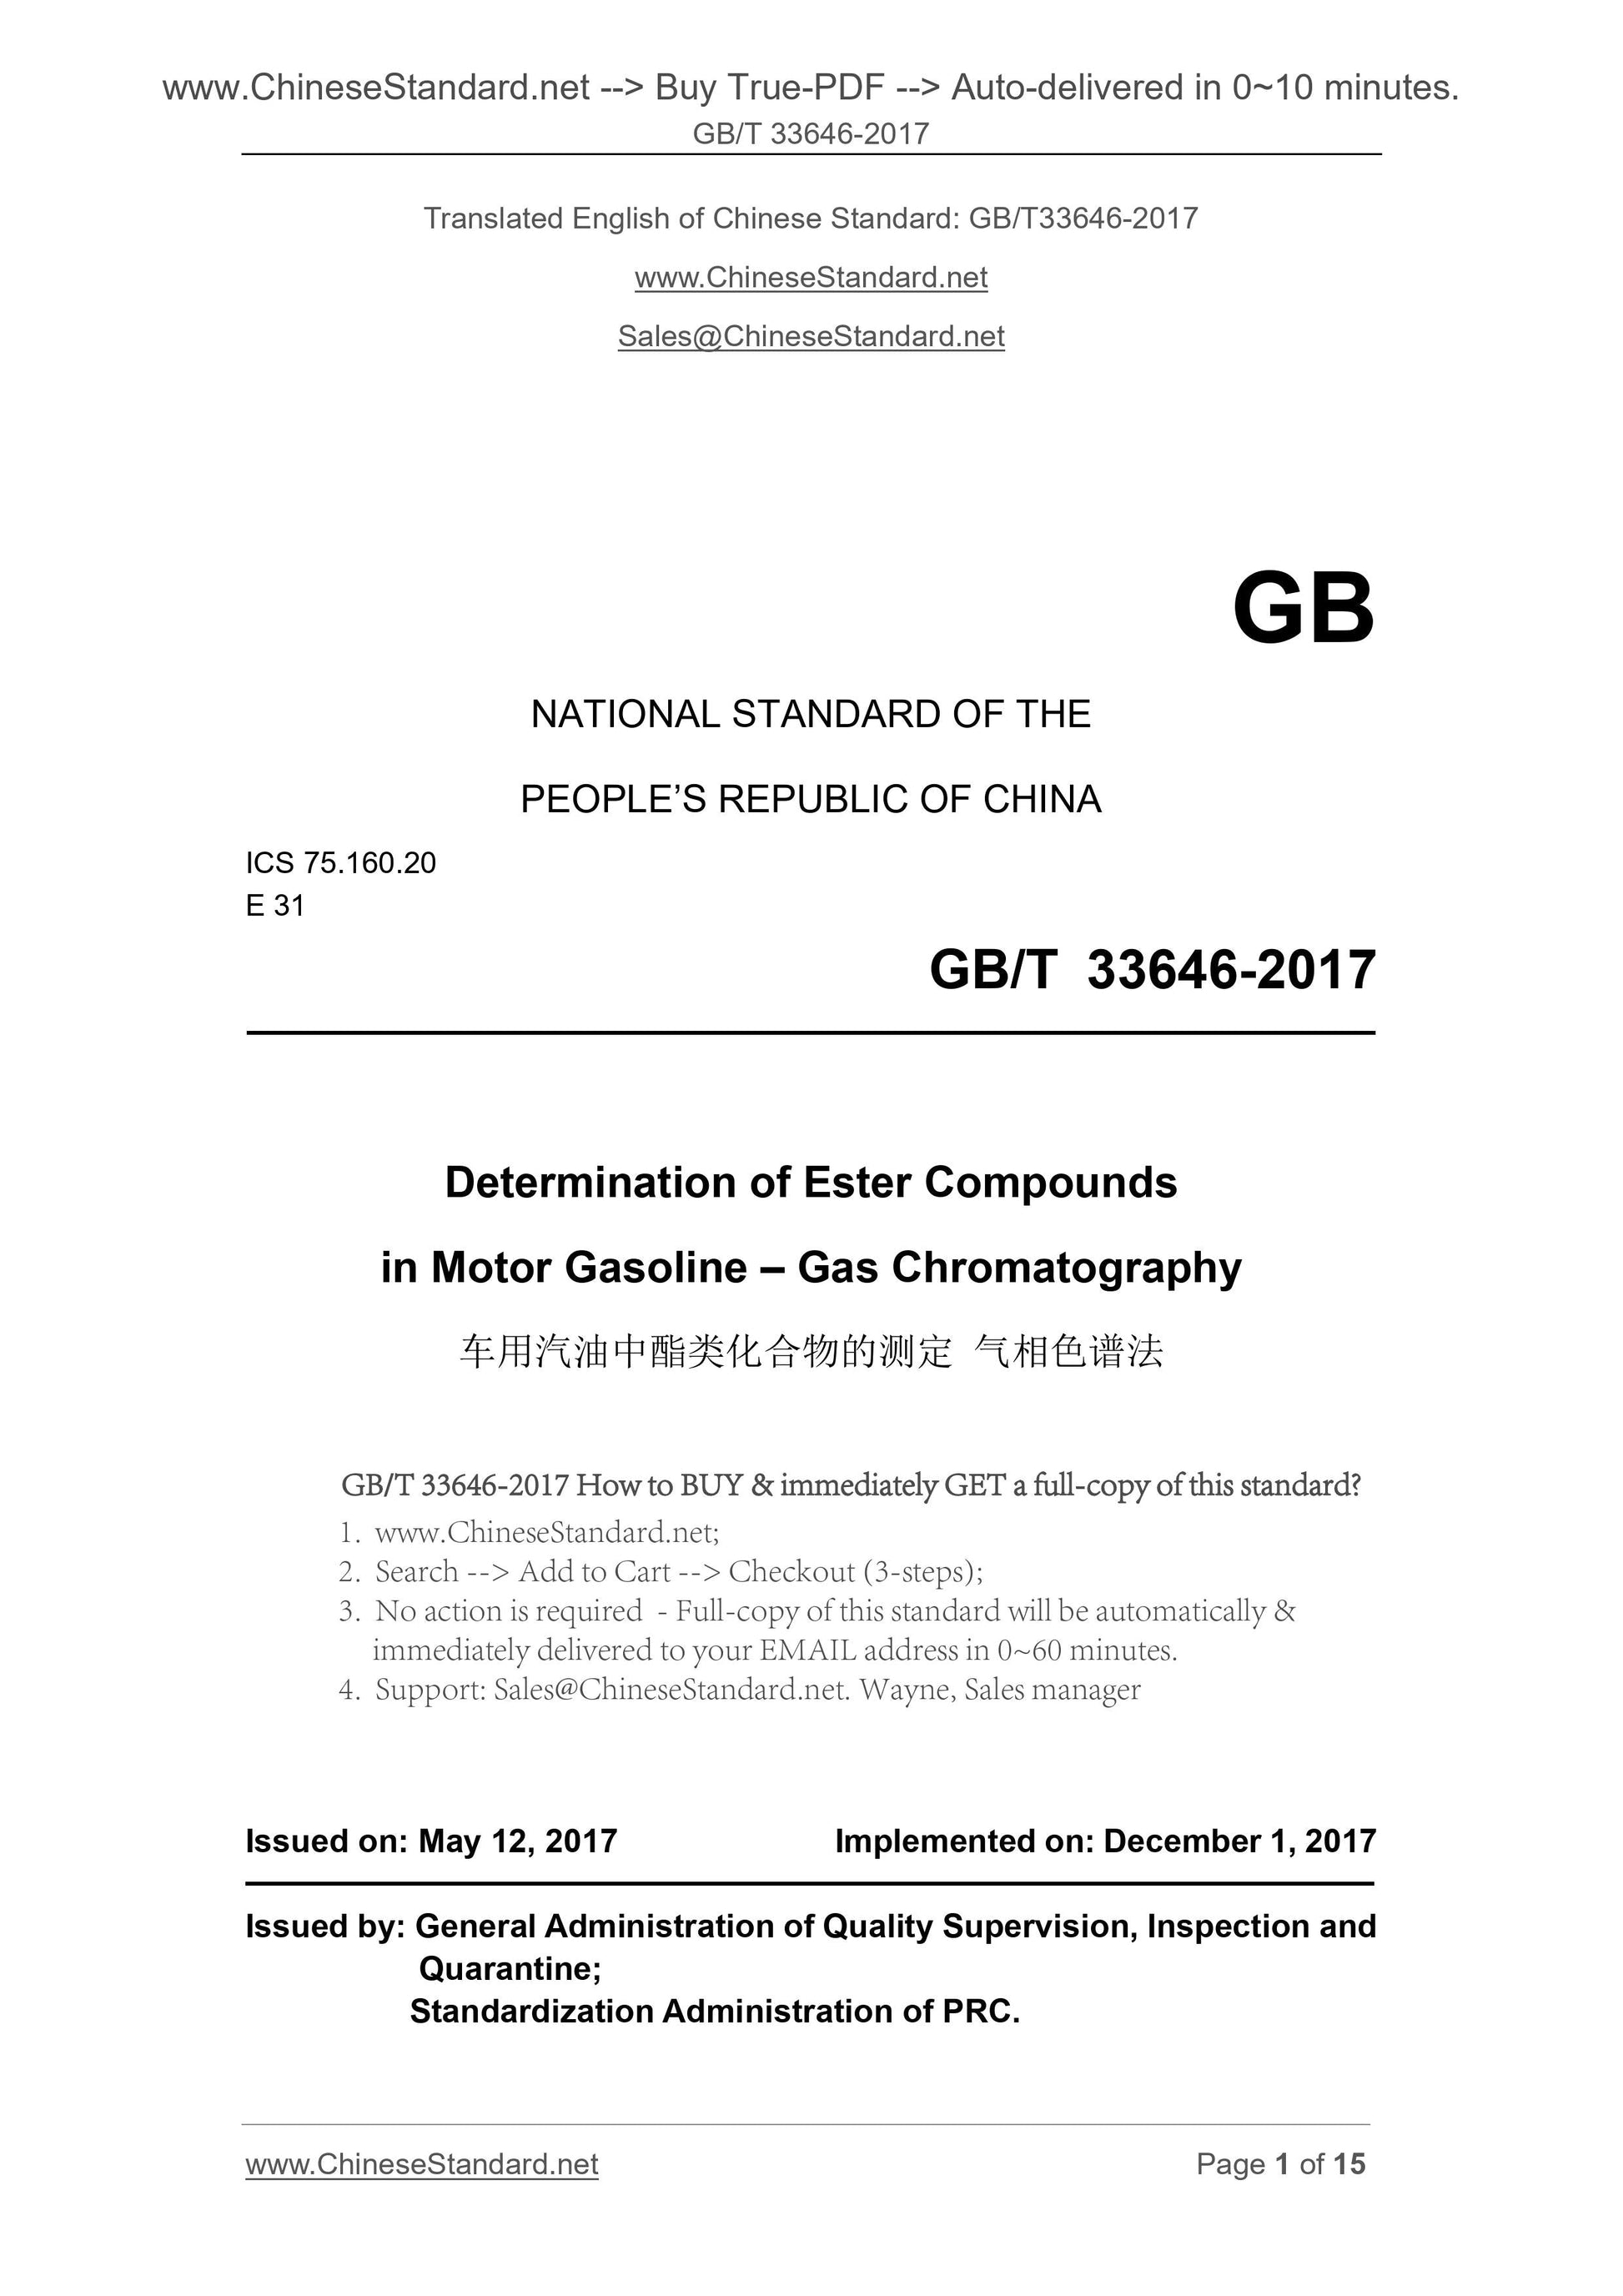 GB/T 33646-2017 Page 1